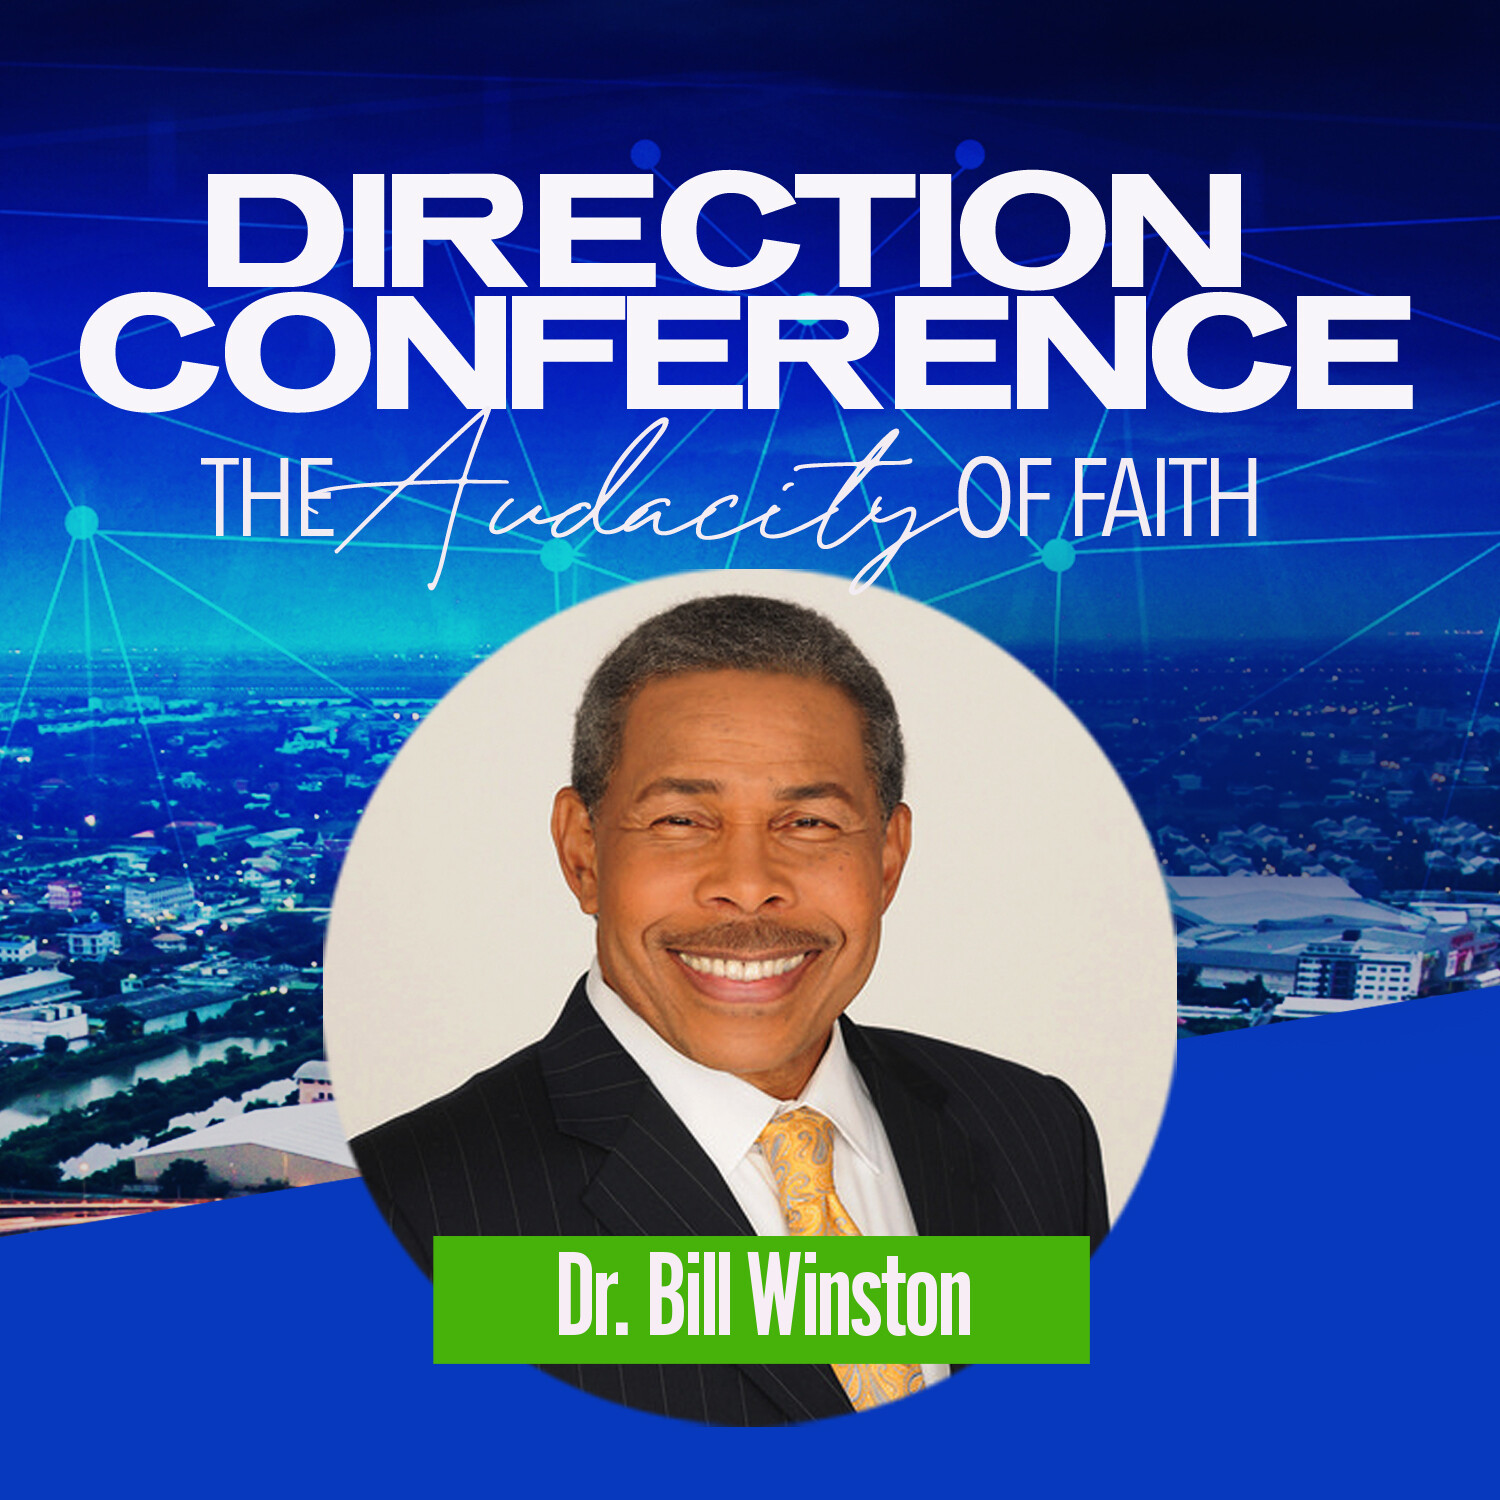 Direction Conference 2020 - Dr. Bill Winston